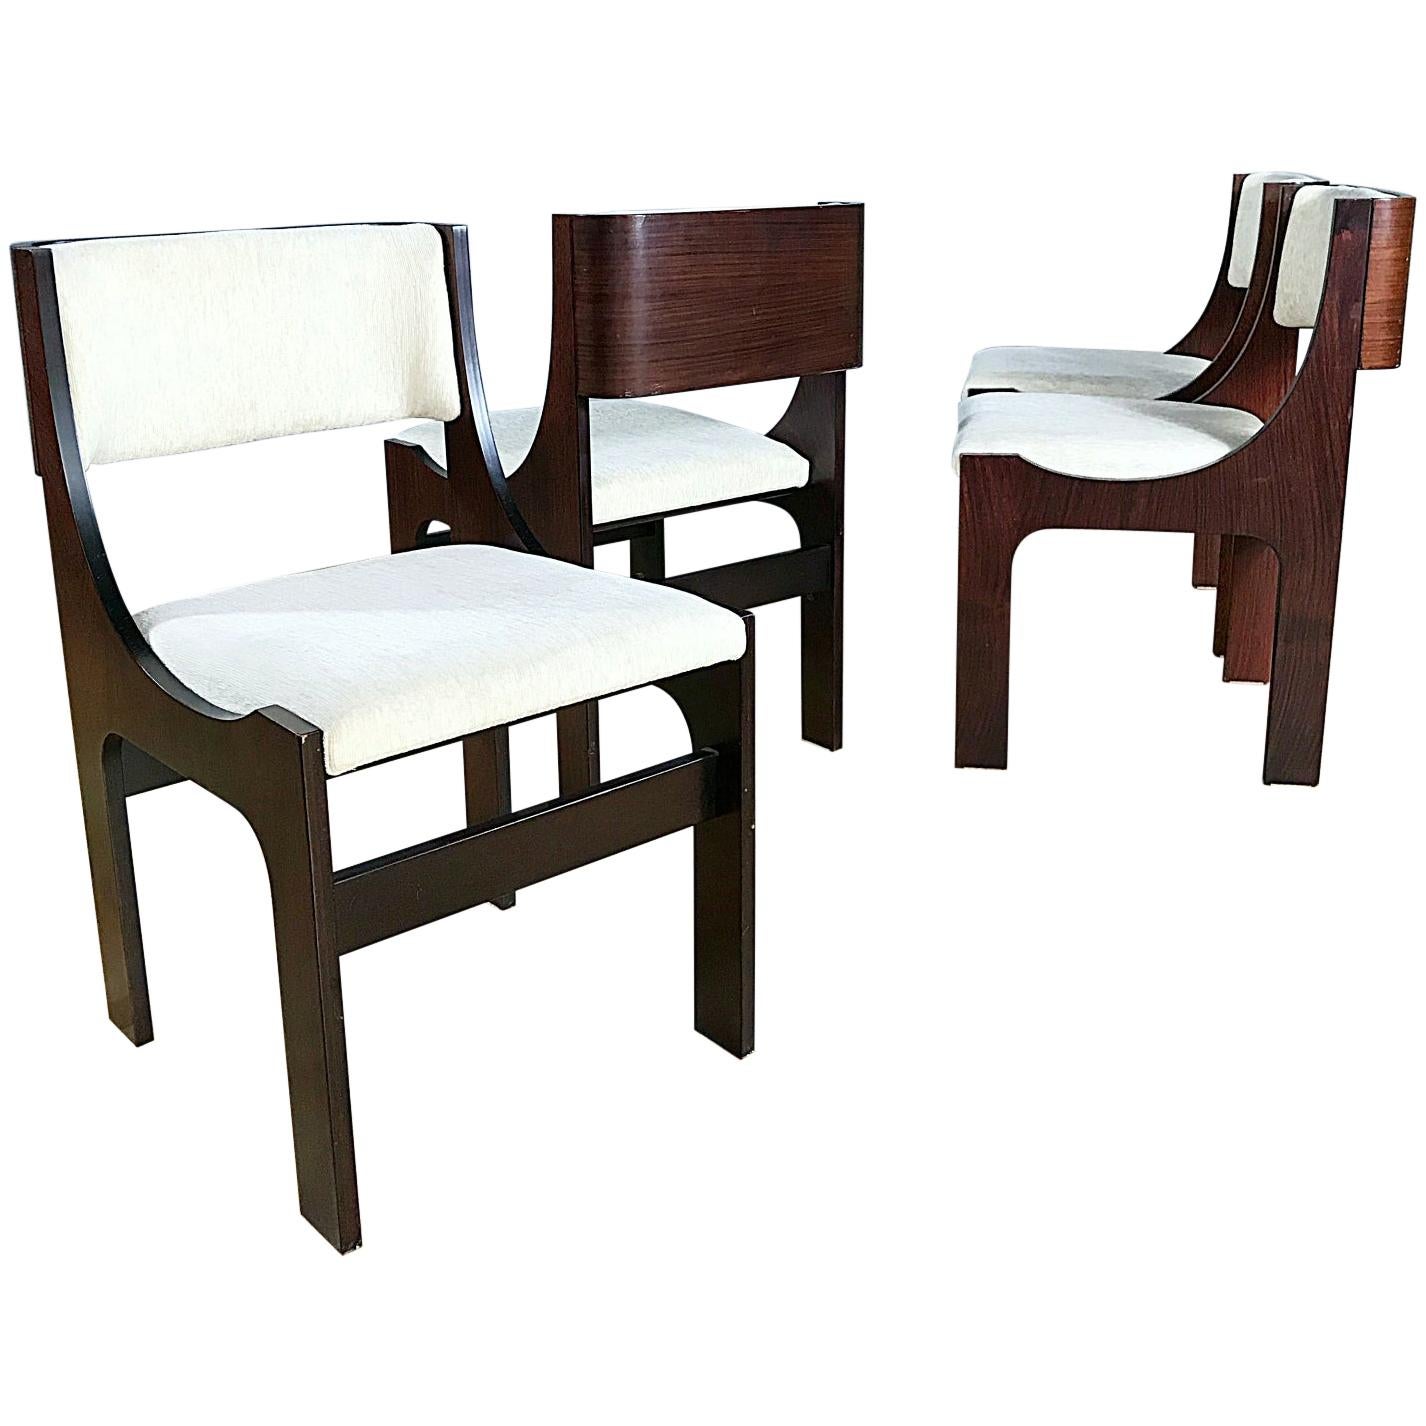 Four Italian Postmodern Sculptural Walnut Dining Chairs, 1980s, Italy